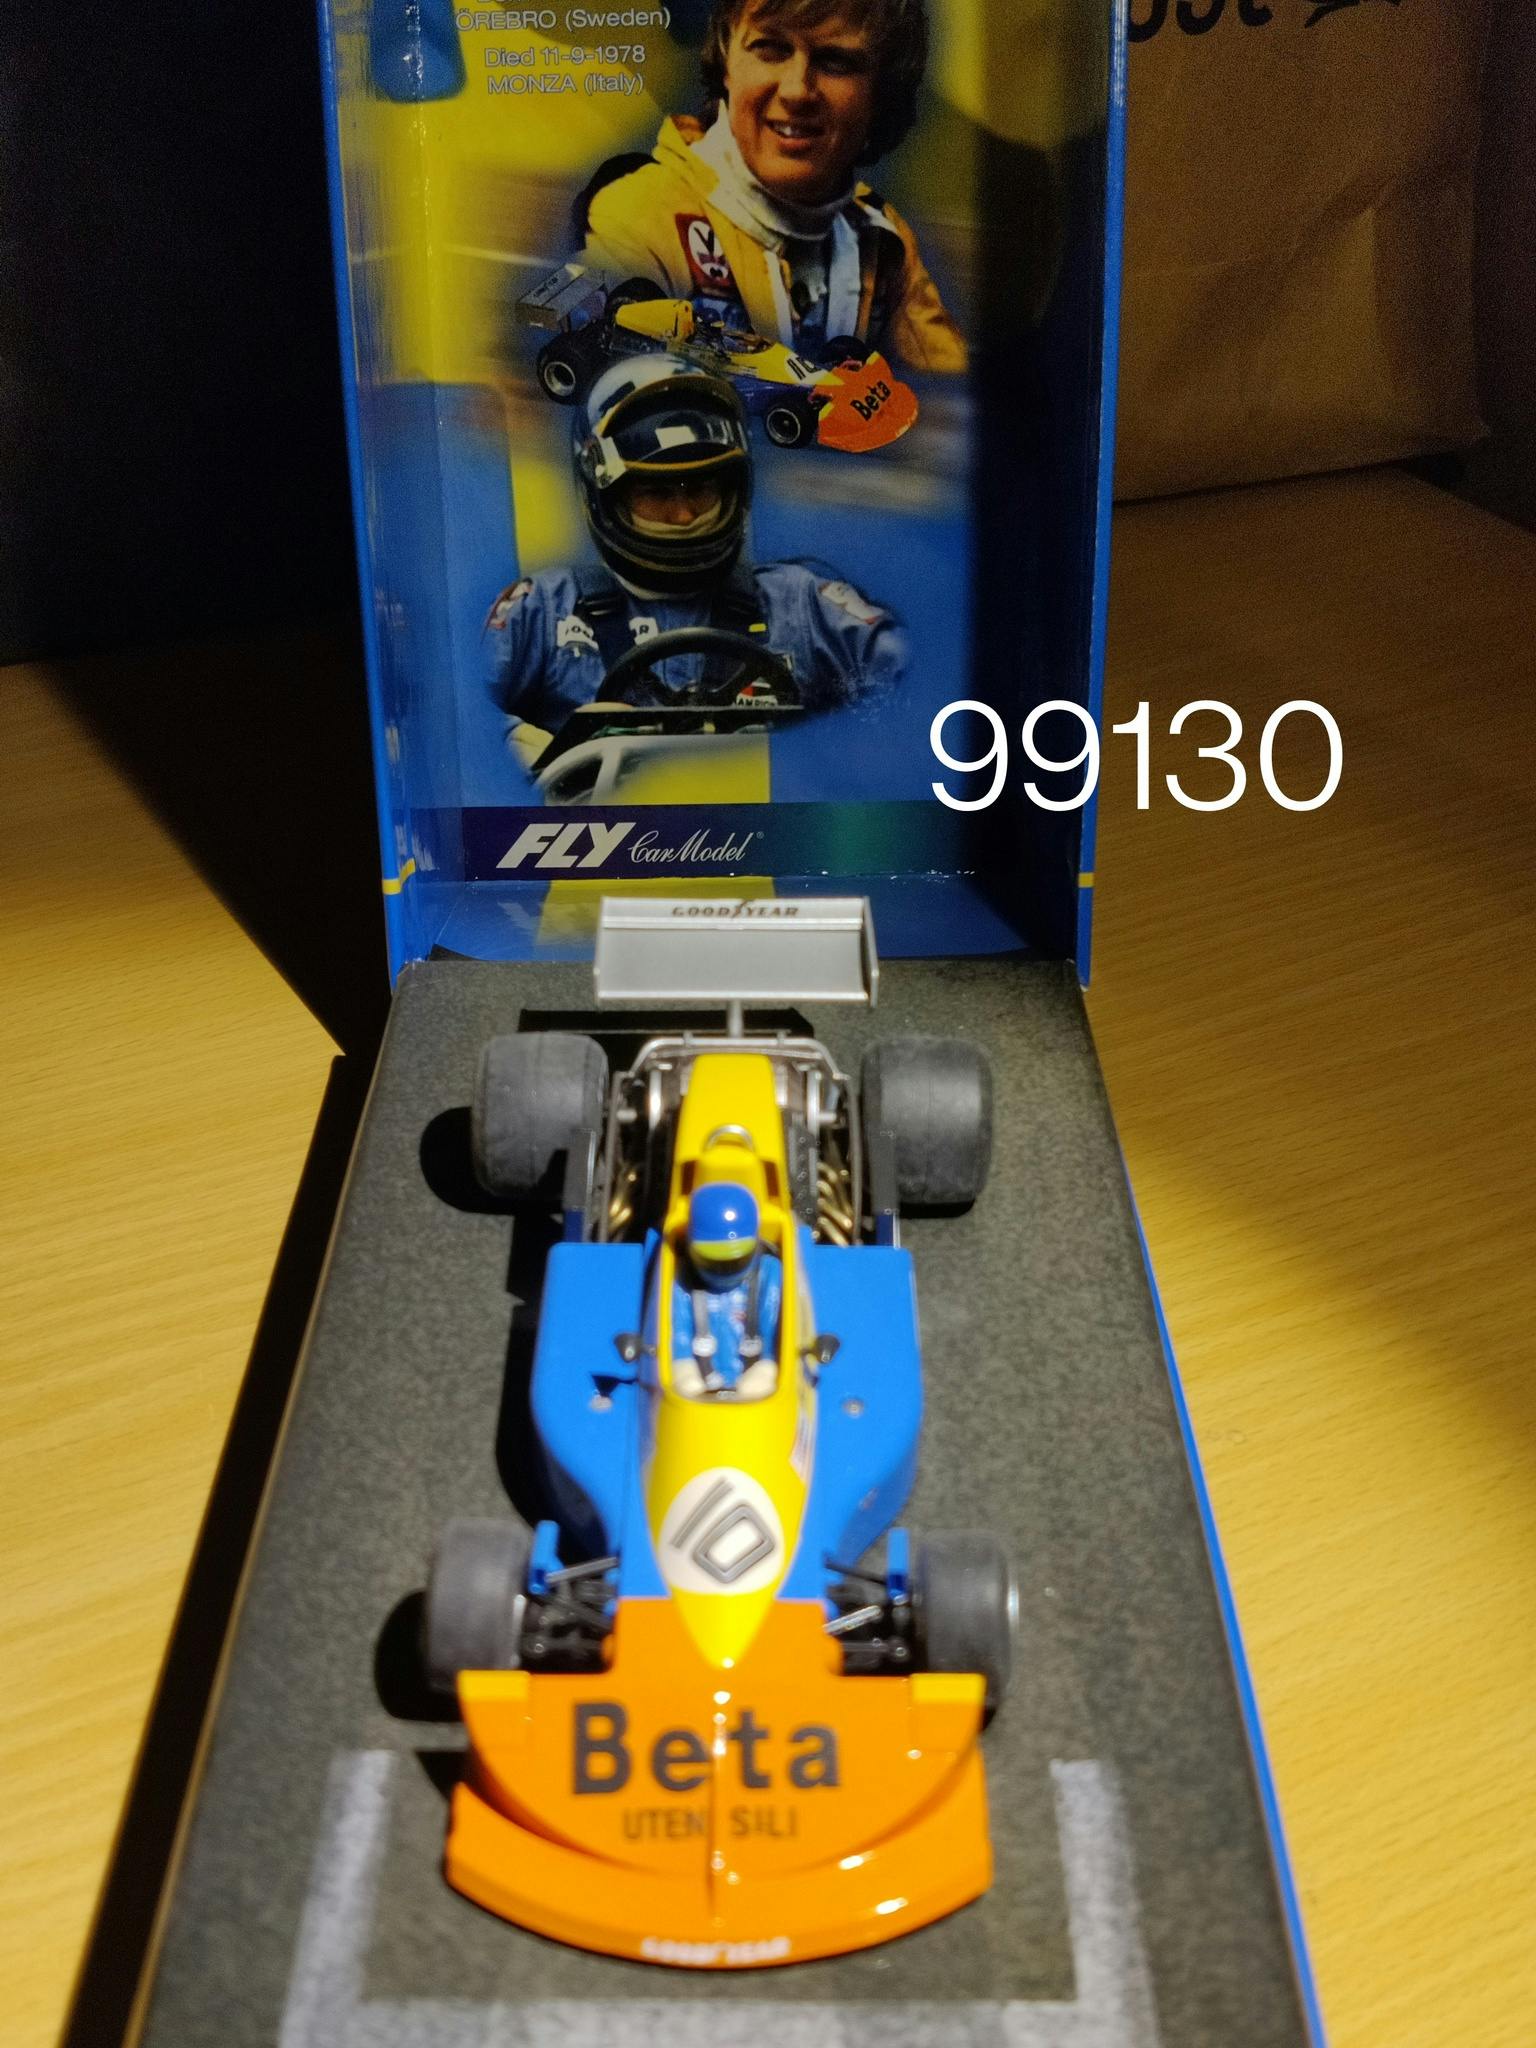 FLY Car Model - March 761 . Ronnie Peterson Museum - Test GP Espana 1976 (1200 SEK) I LAGER / IN STOCK